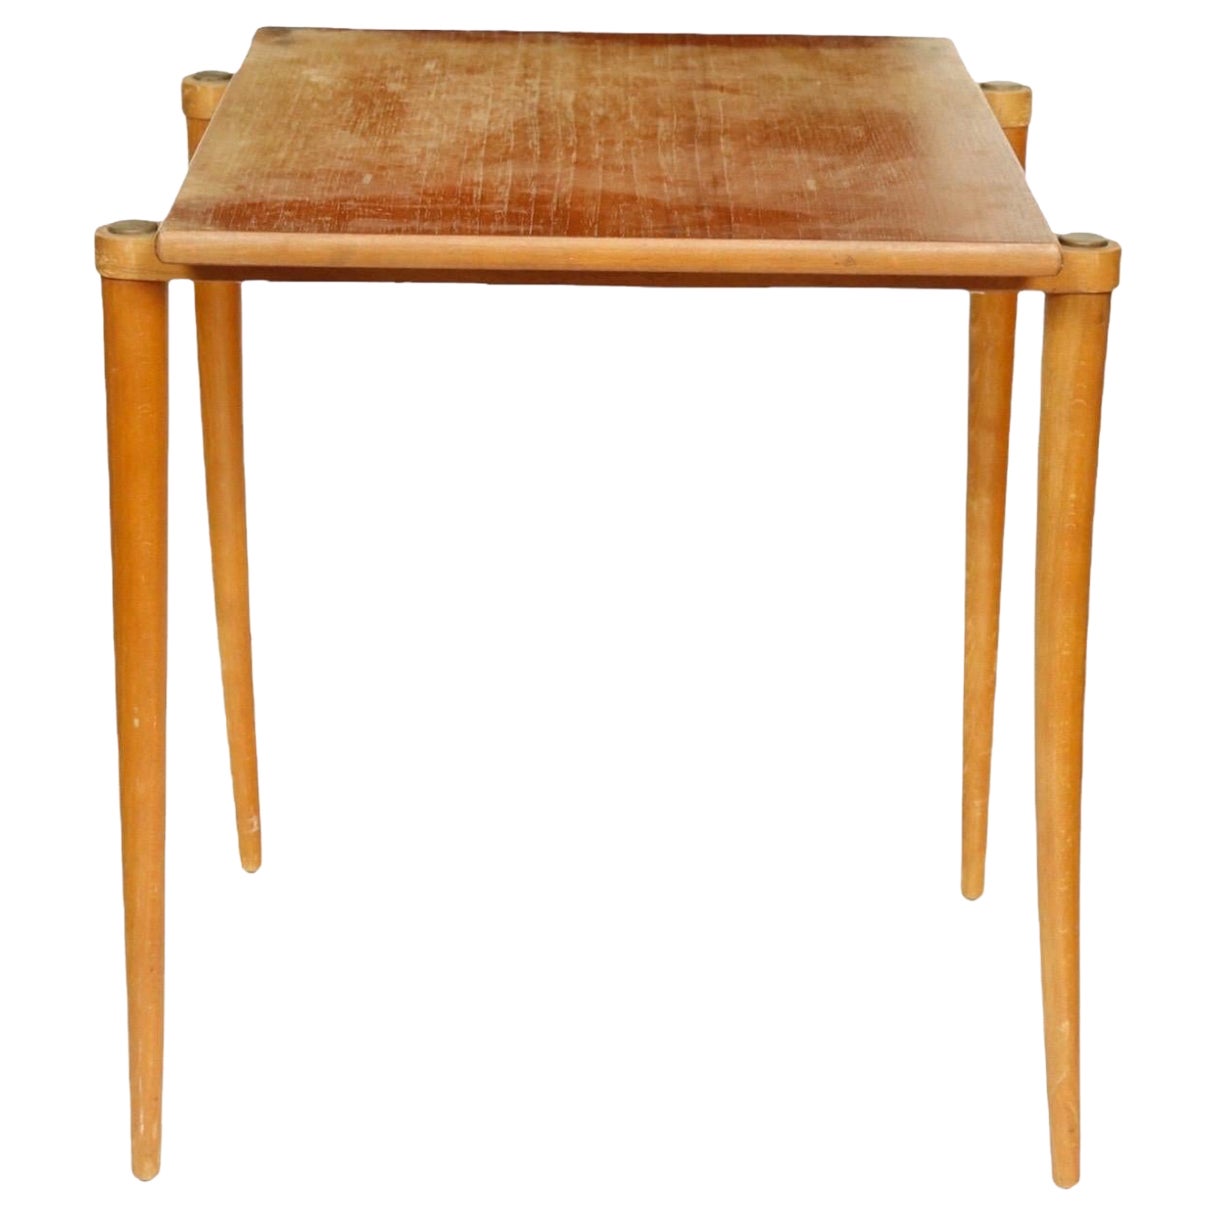 Midcentury Teak Side Table from A-B. Ljungqvist Furniture Factory For Sale